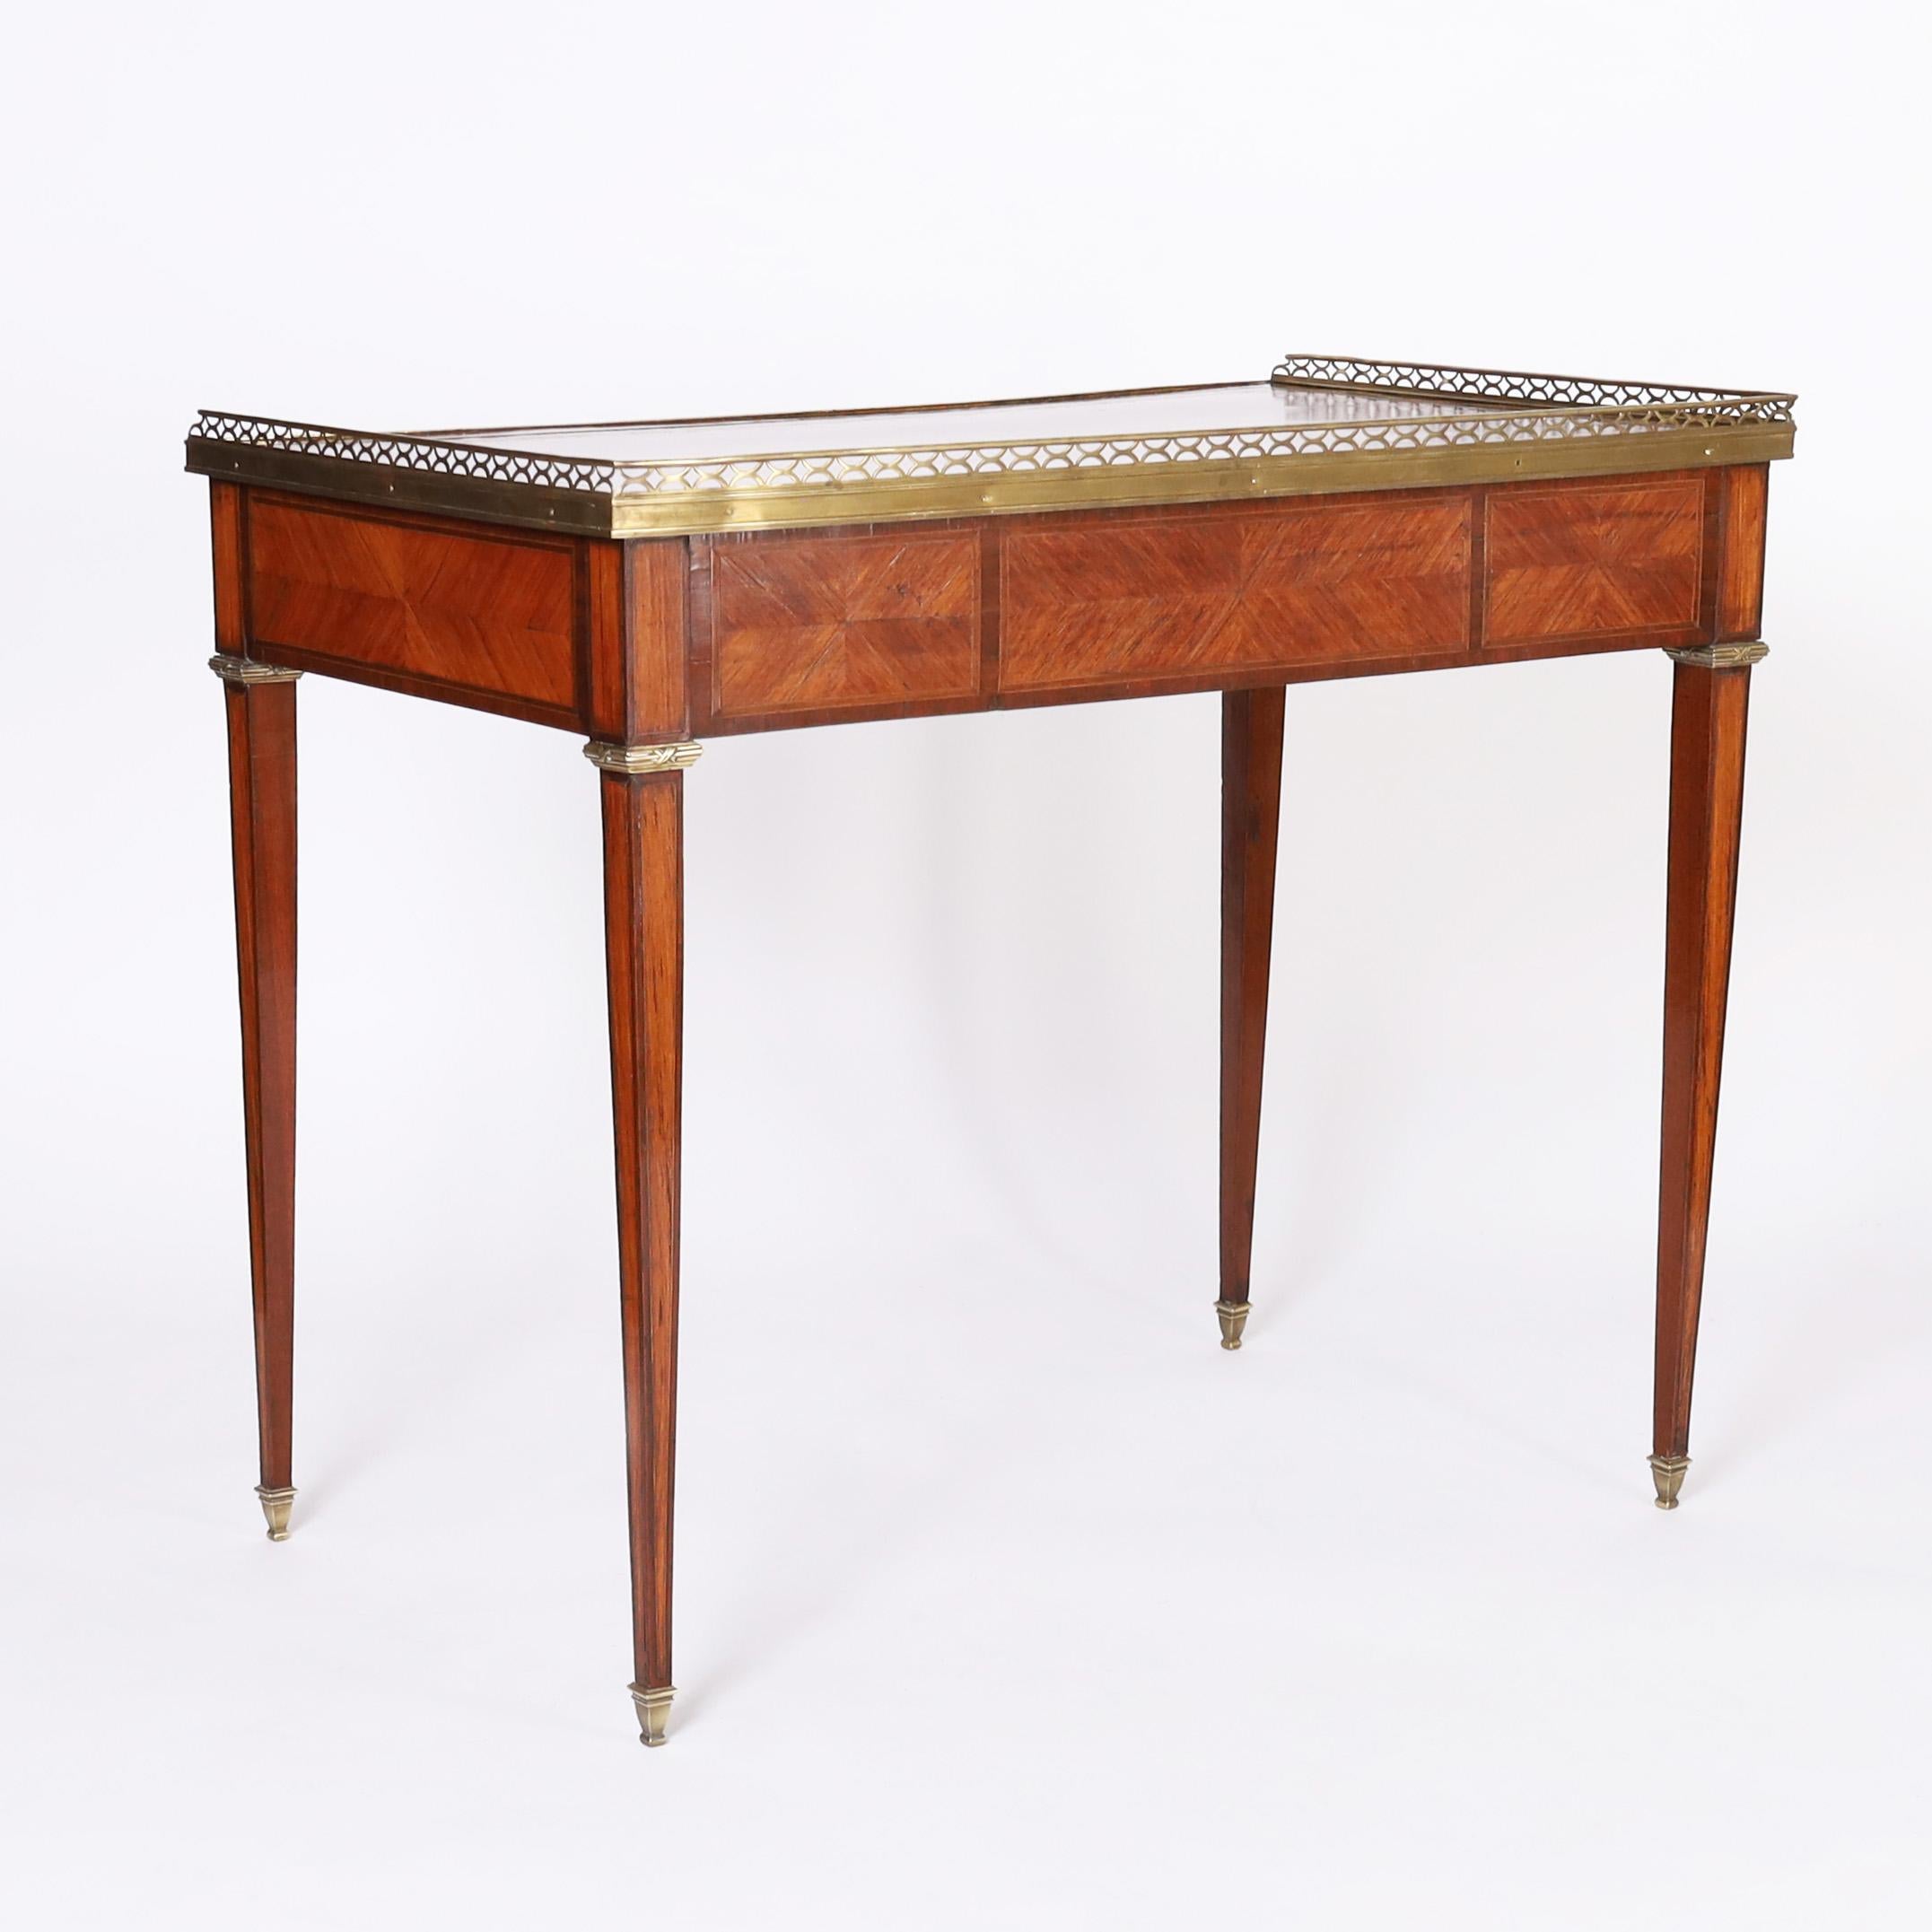 20th Century Antique French Louis XVI Style Leather Top Writing Desk For Sale